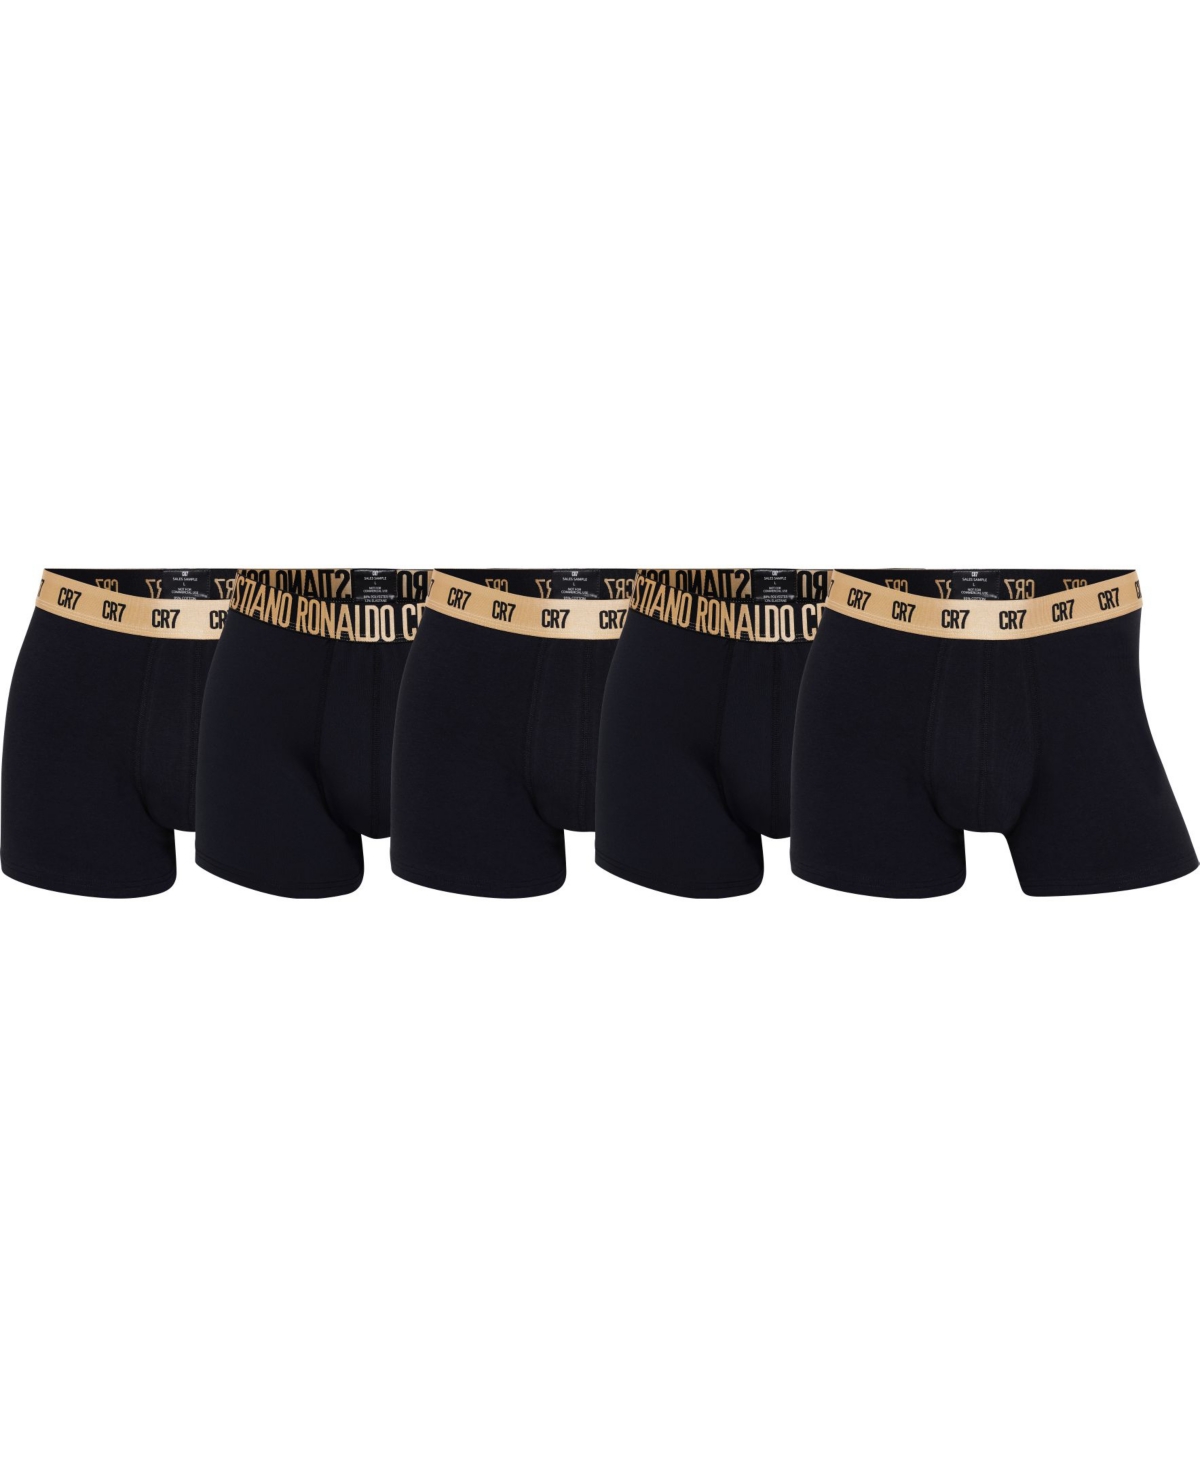 Cristiano Ronaldo Men's Trunk, Pack of 5 with Travel Bag - Black